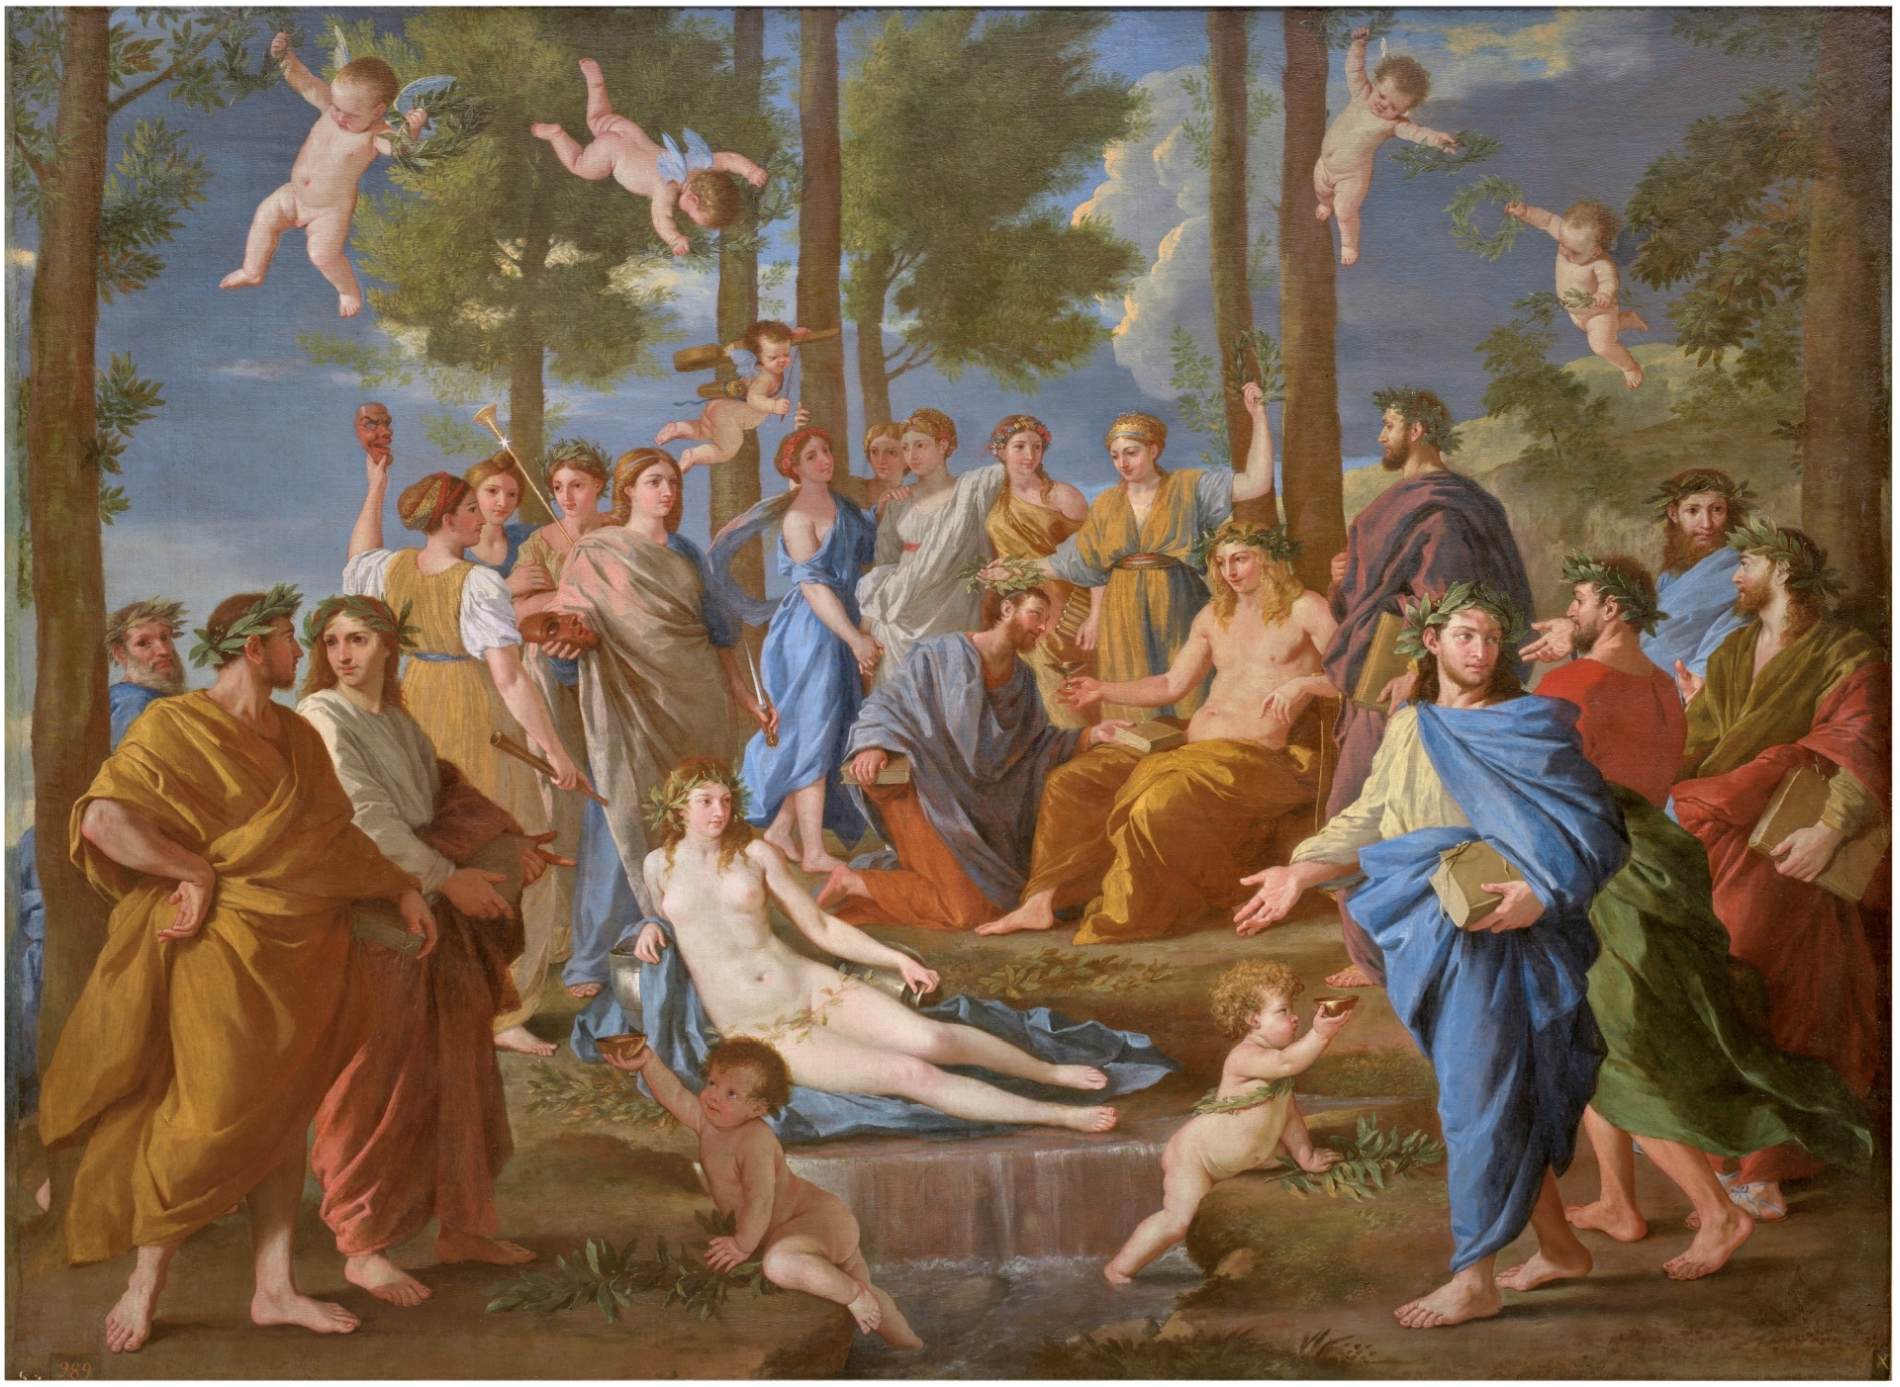 Apollo and the Muses (Parnassus)